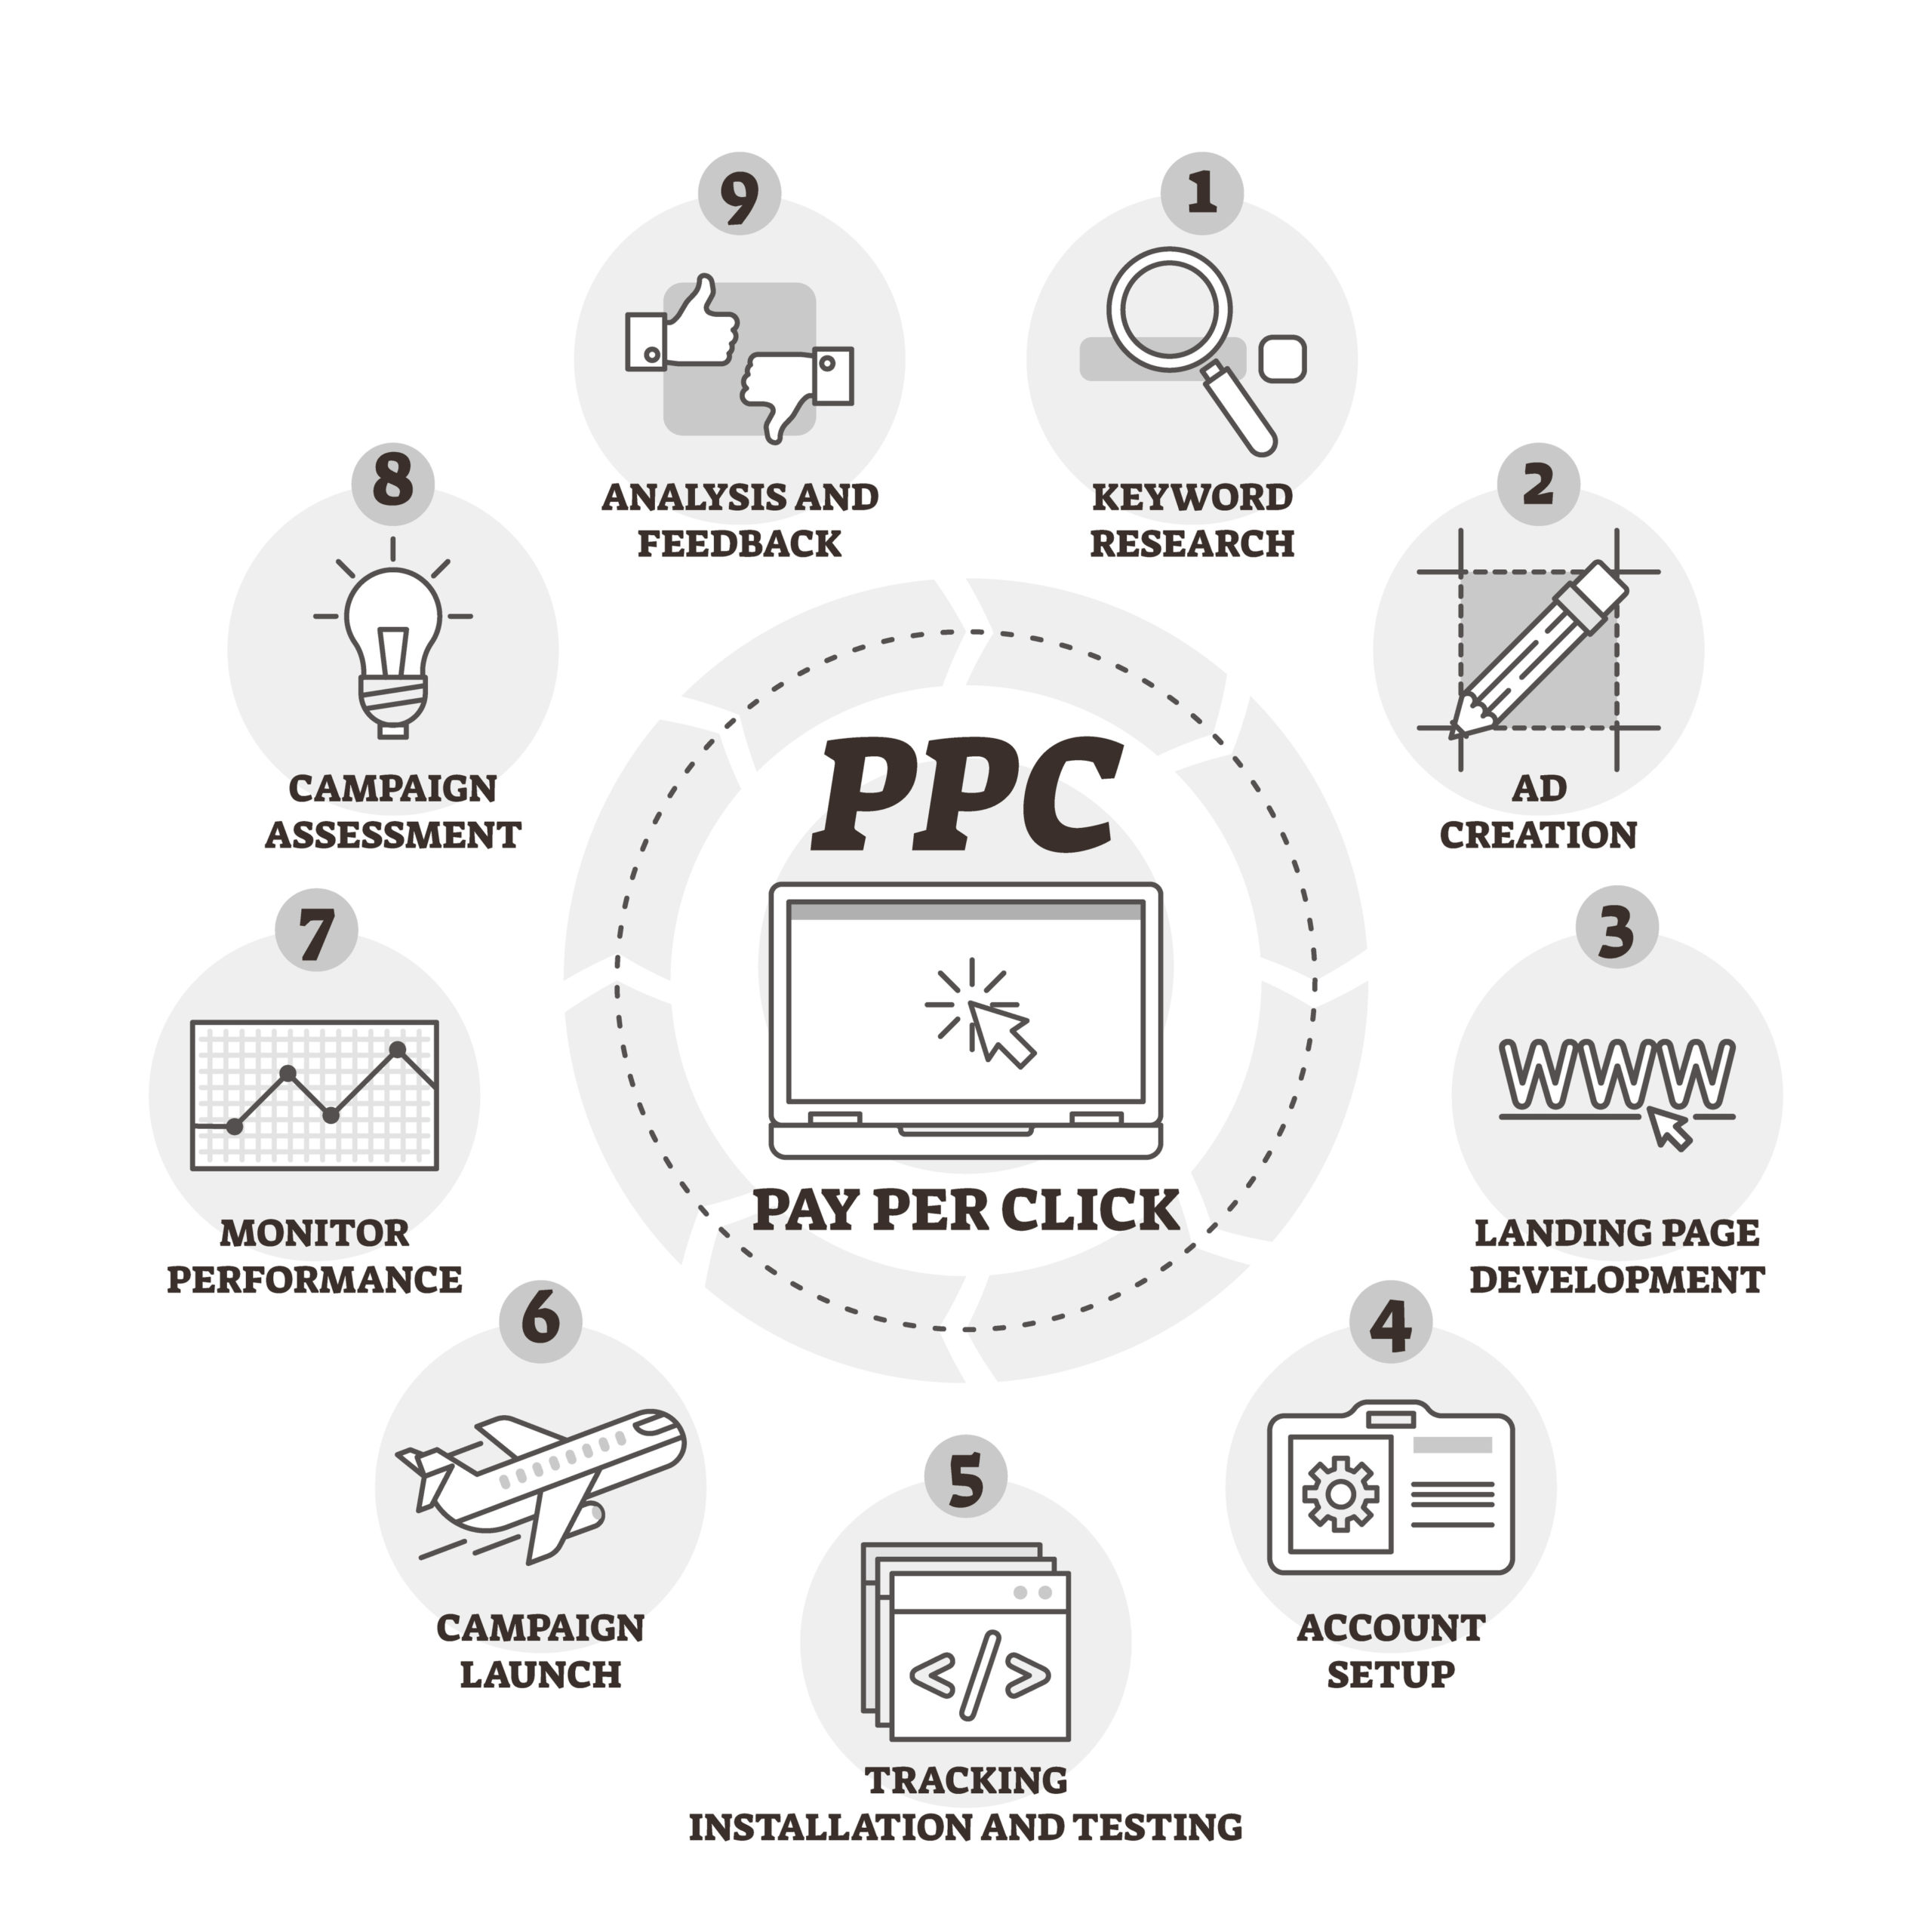 Pay per click or PPC vector illustration. Labeled explanation in